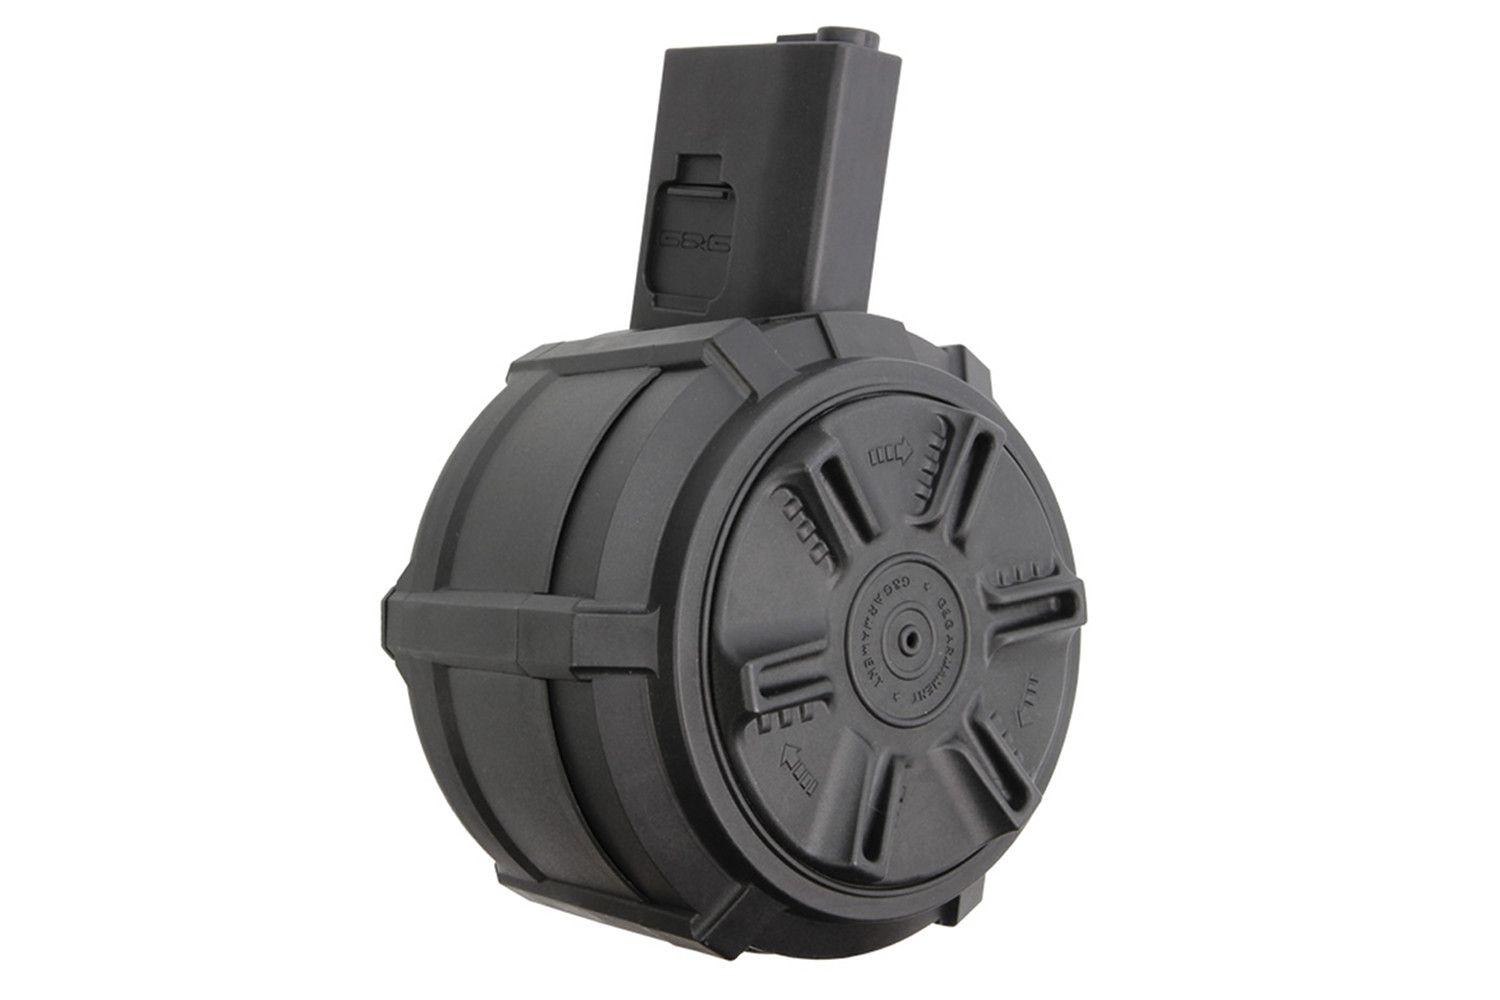 G&G 2300R Auto Wind Drum Magazine For M4/M16 Airsoft Rifles (Li-Po Battery Included)